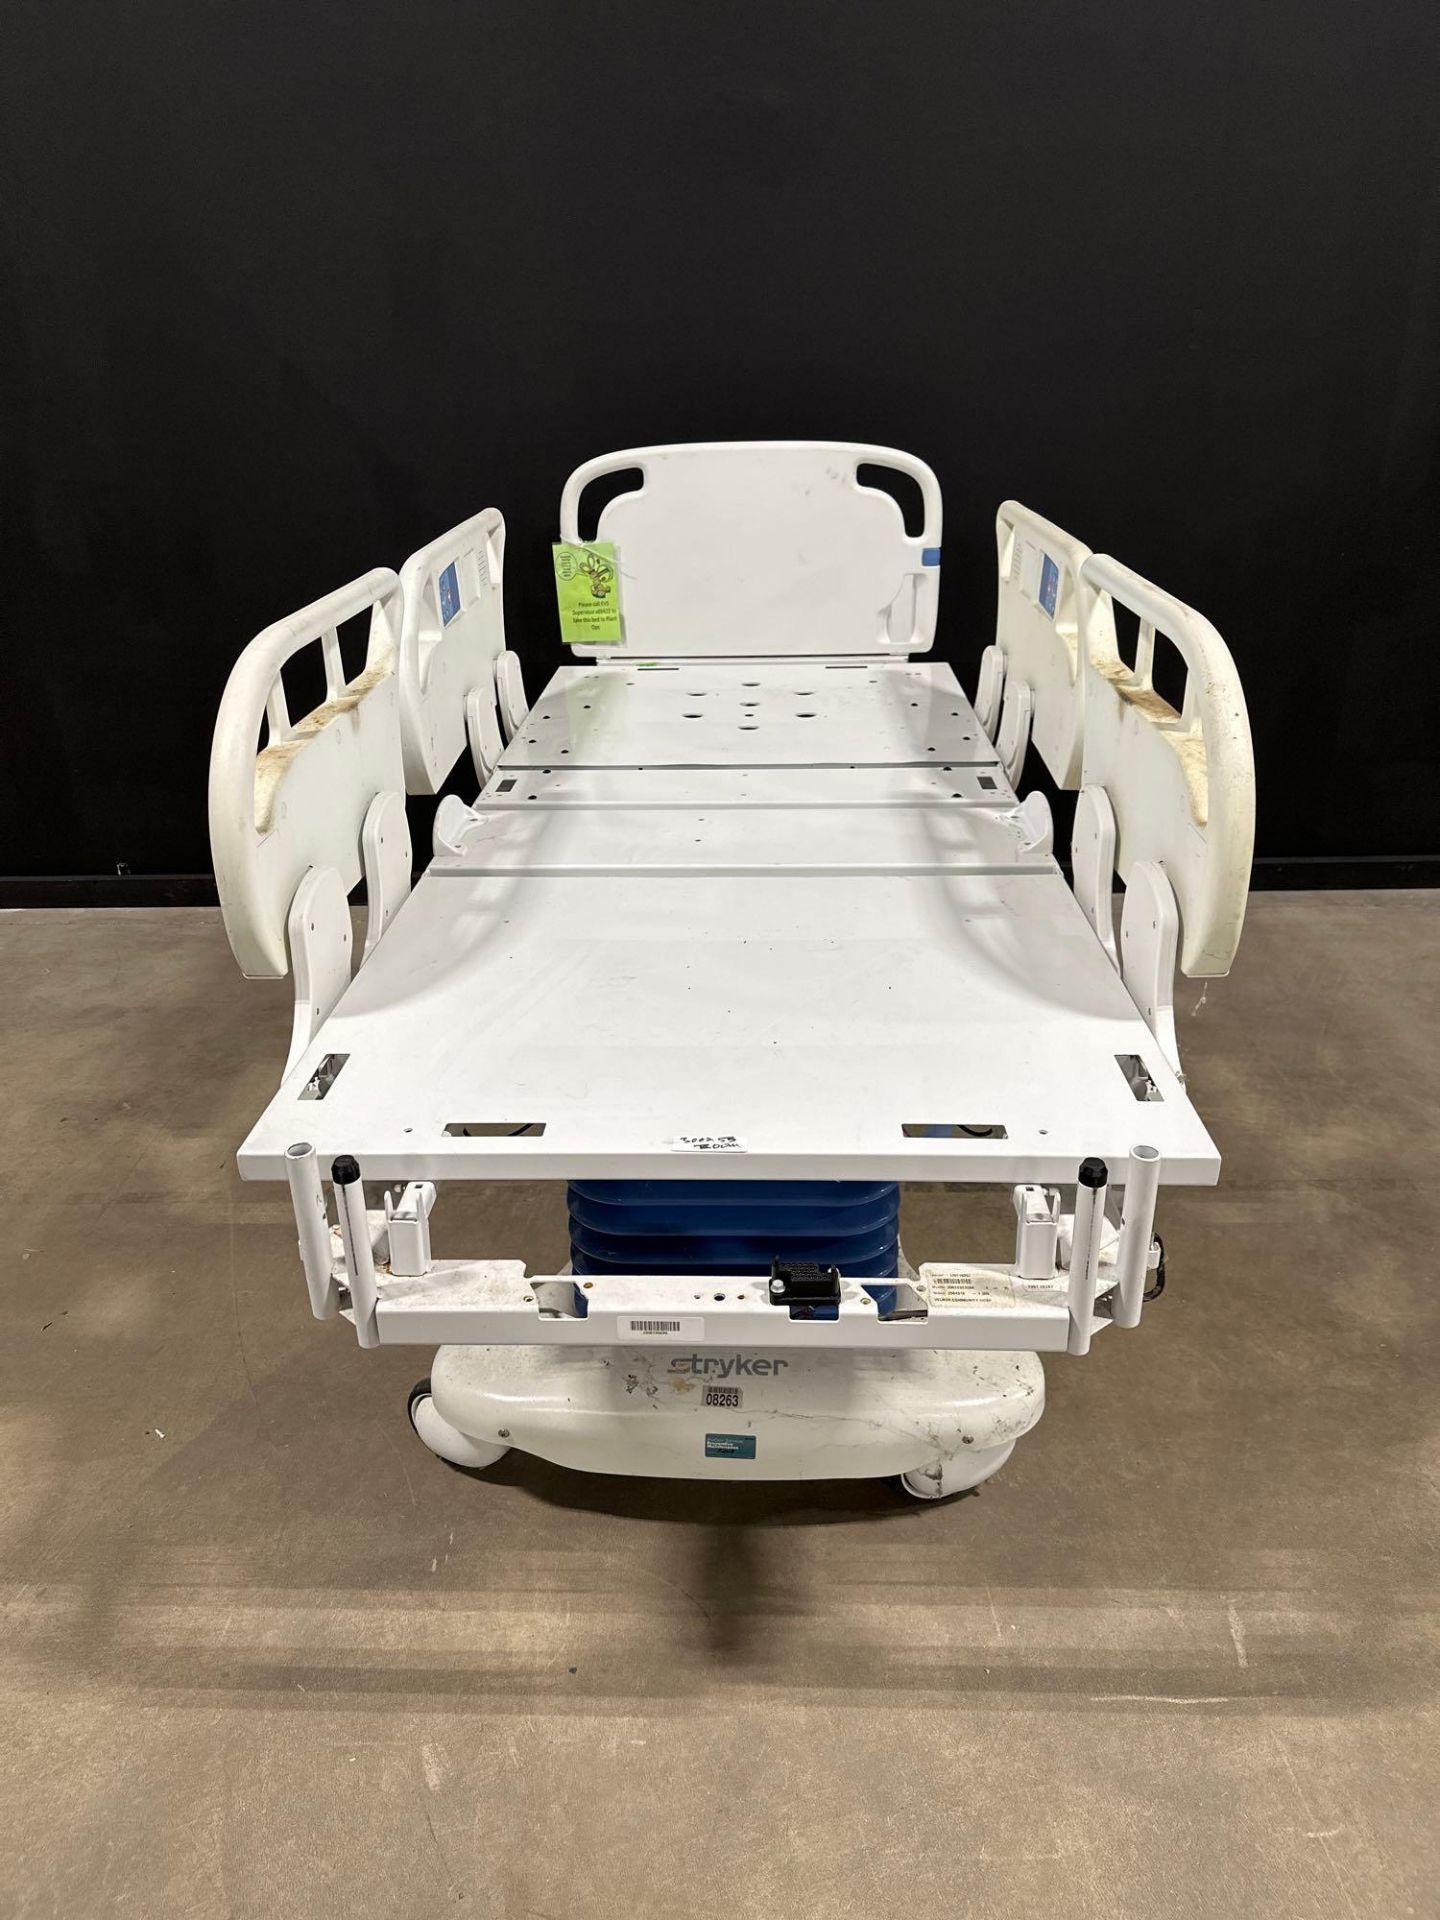 STRYKER 3002 S3 ZOOM HOSPITAL BED - Image 2 of 4